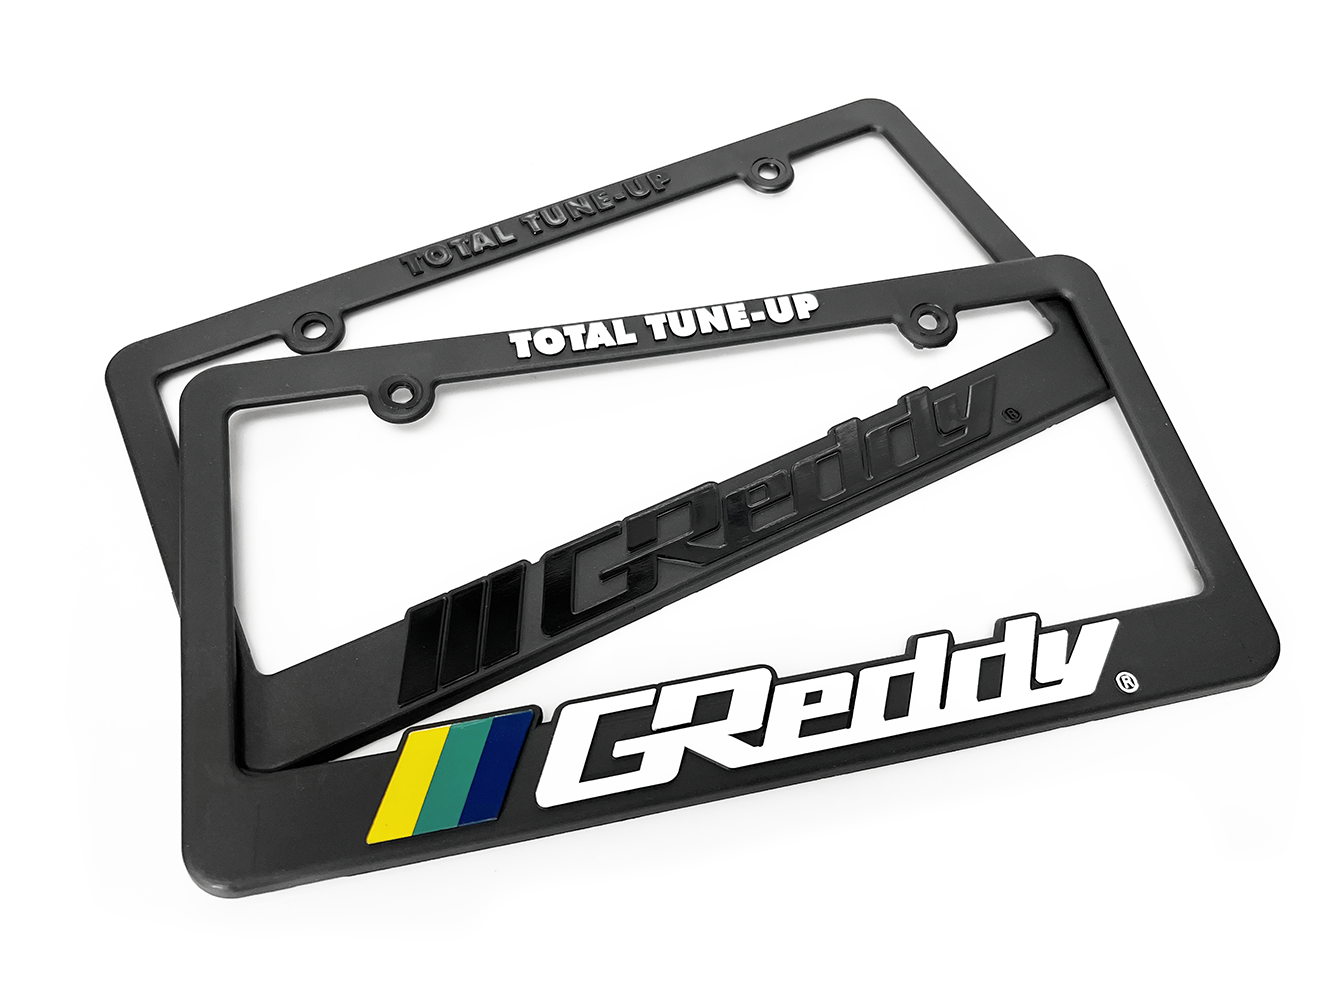 GReddy Total Tune Up  License Plate Frame - "Black-out" or "Color"